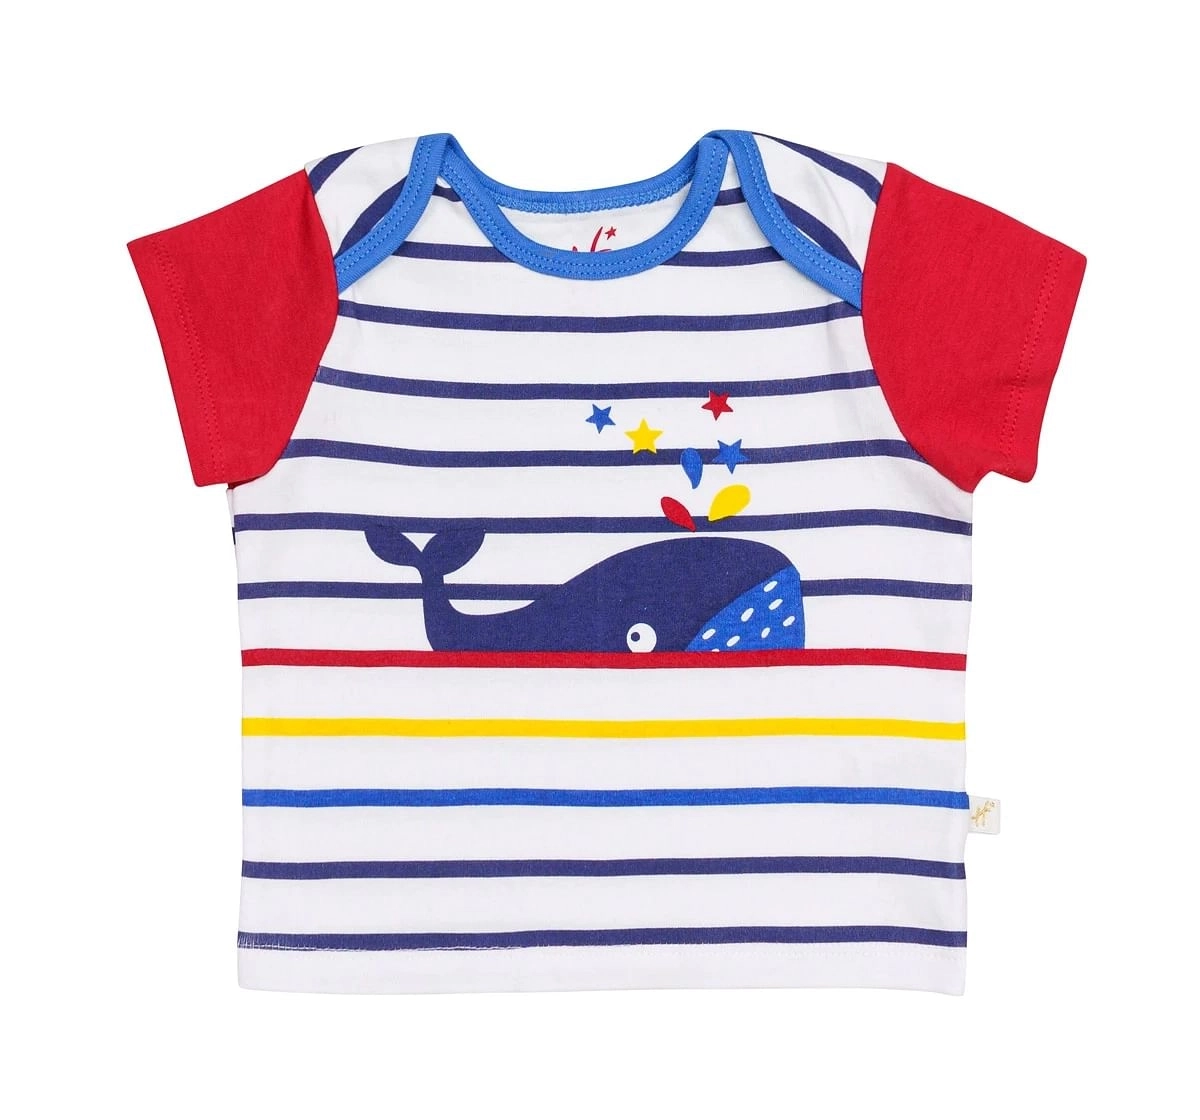 H by Hamleys Boys Short Sleeves Top And Bottom Set Striped - Dolphin Print-Multi